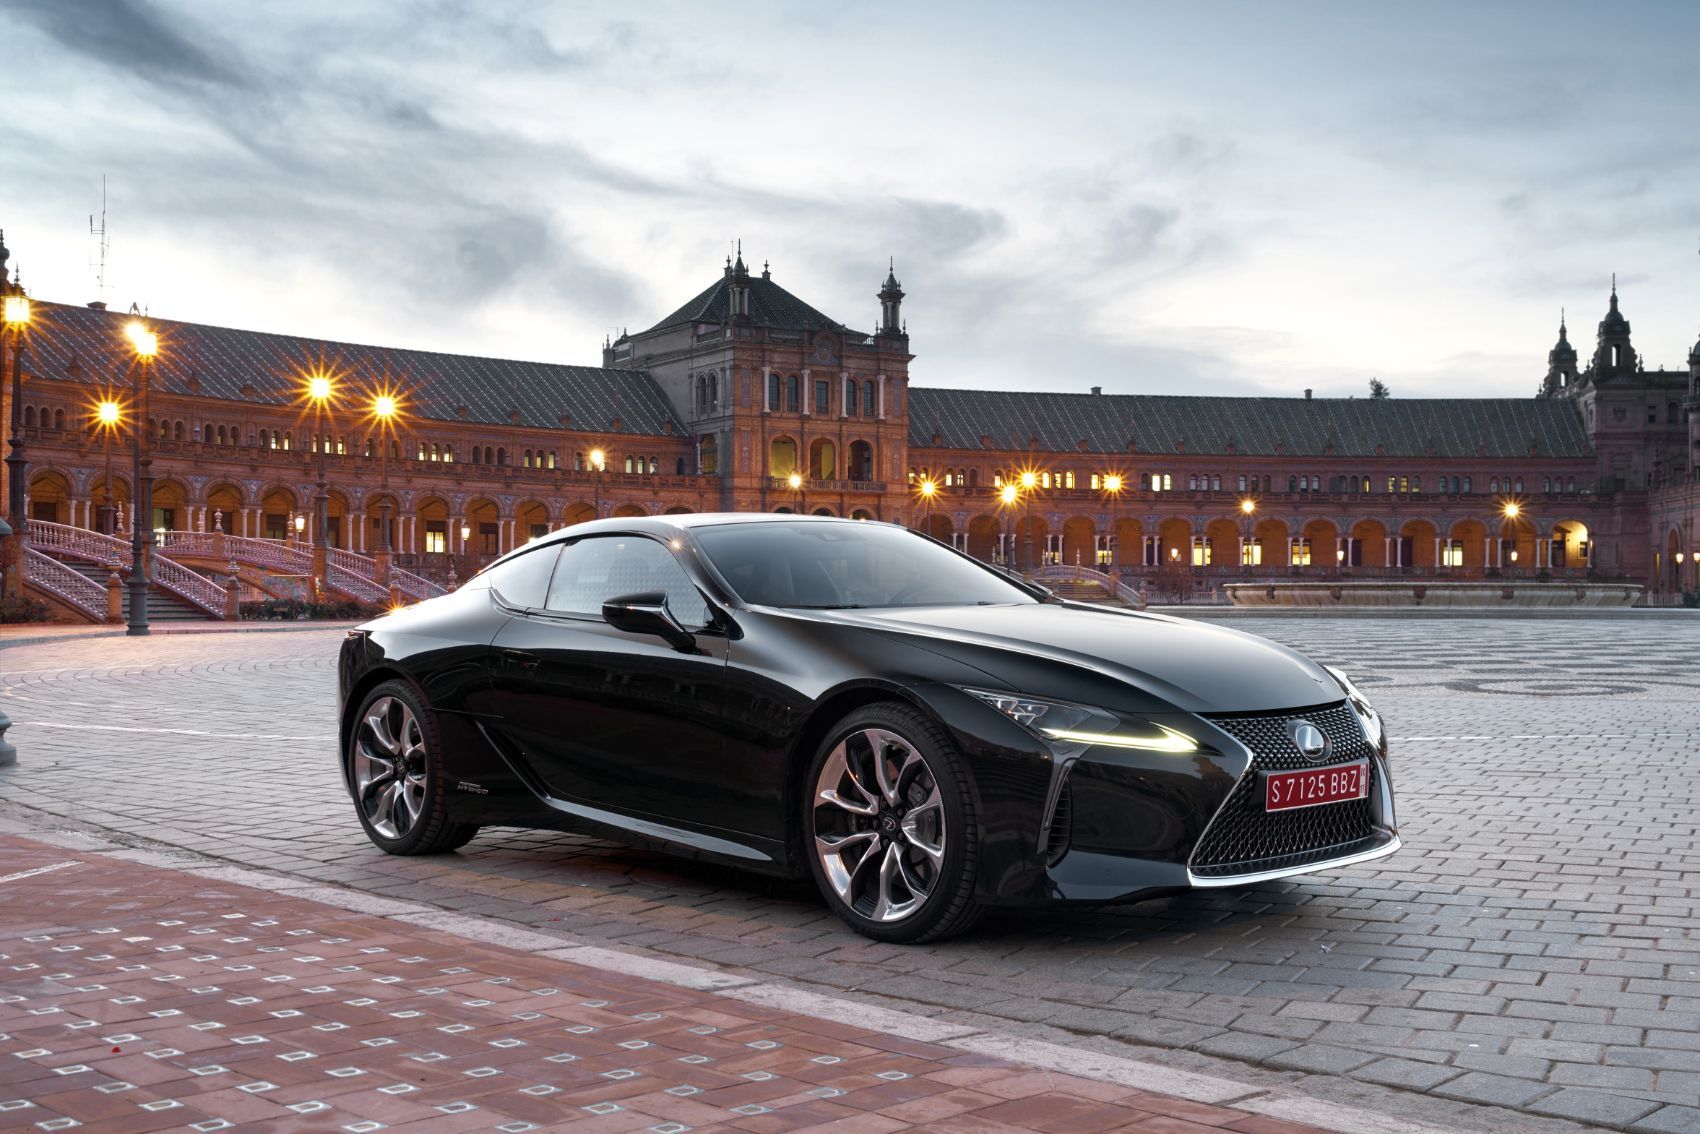 2019 Lexus Lc 500h Review Ideal Blend Between Performance Luxury